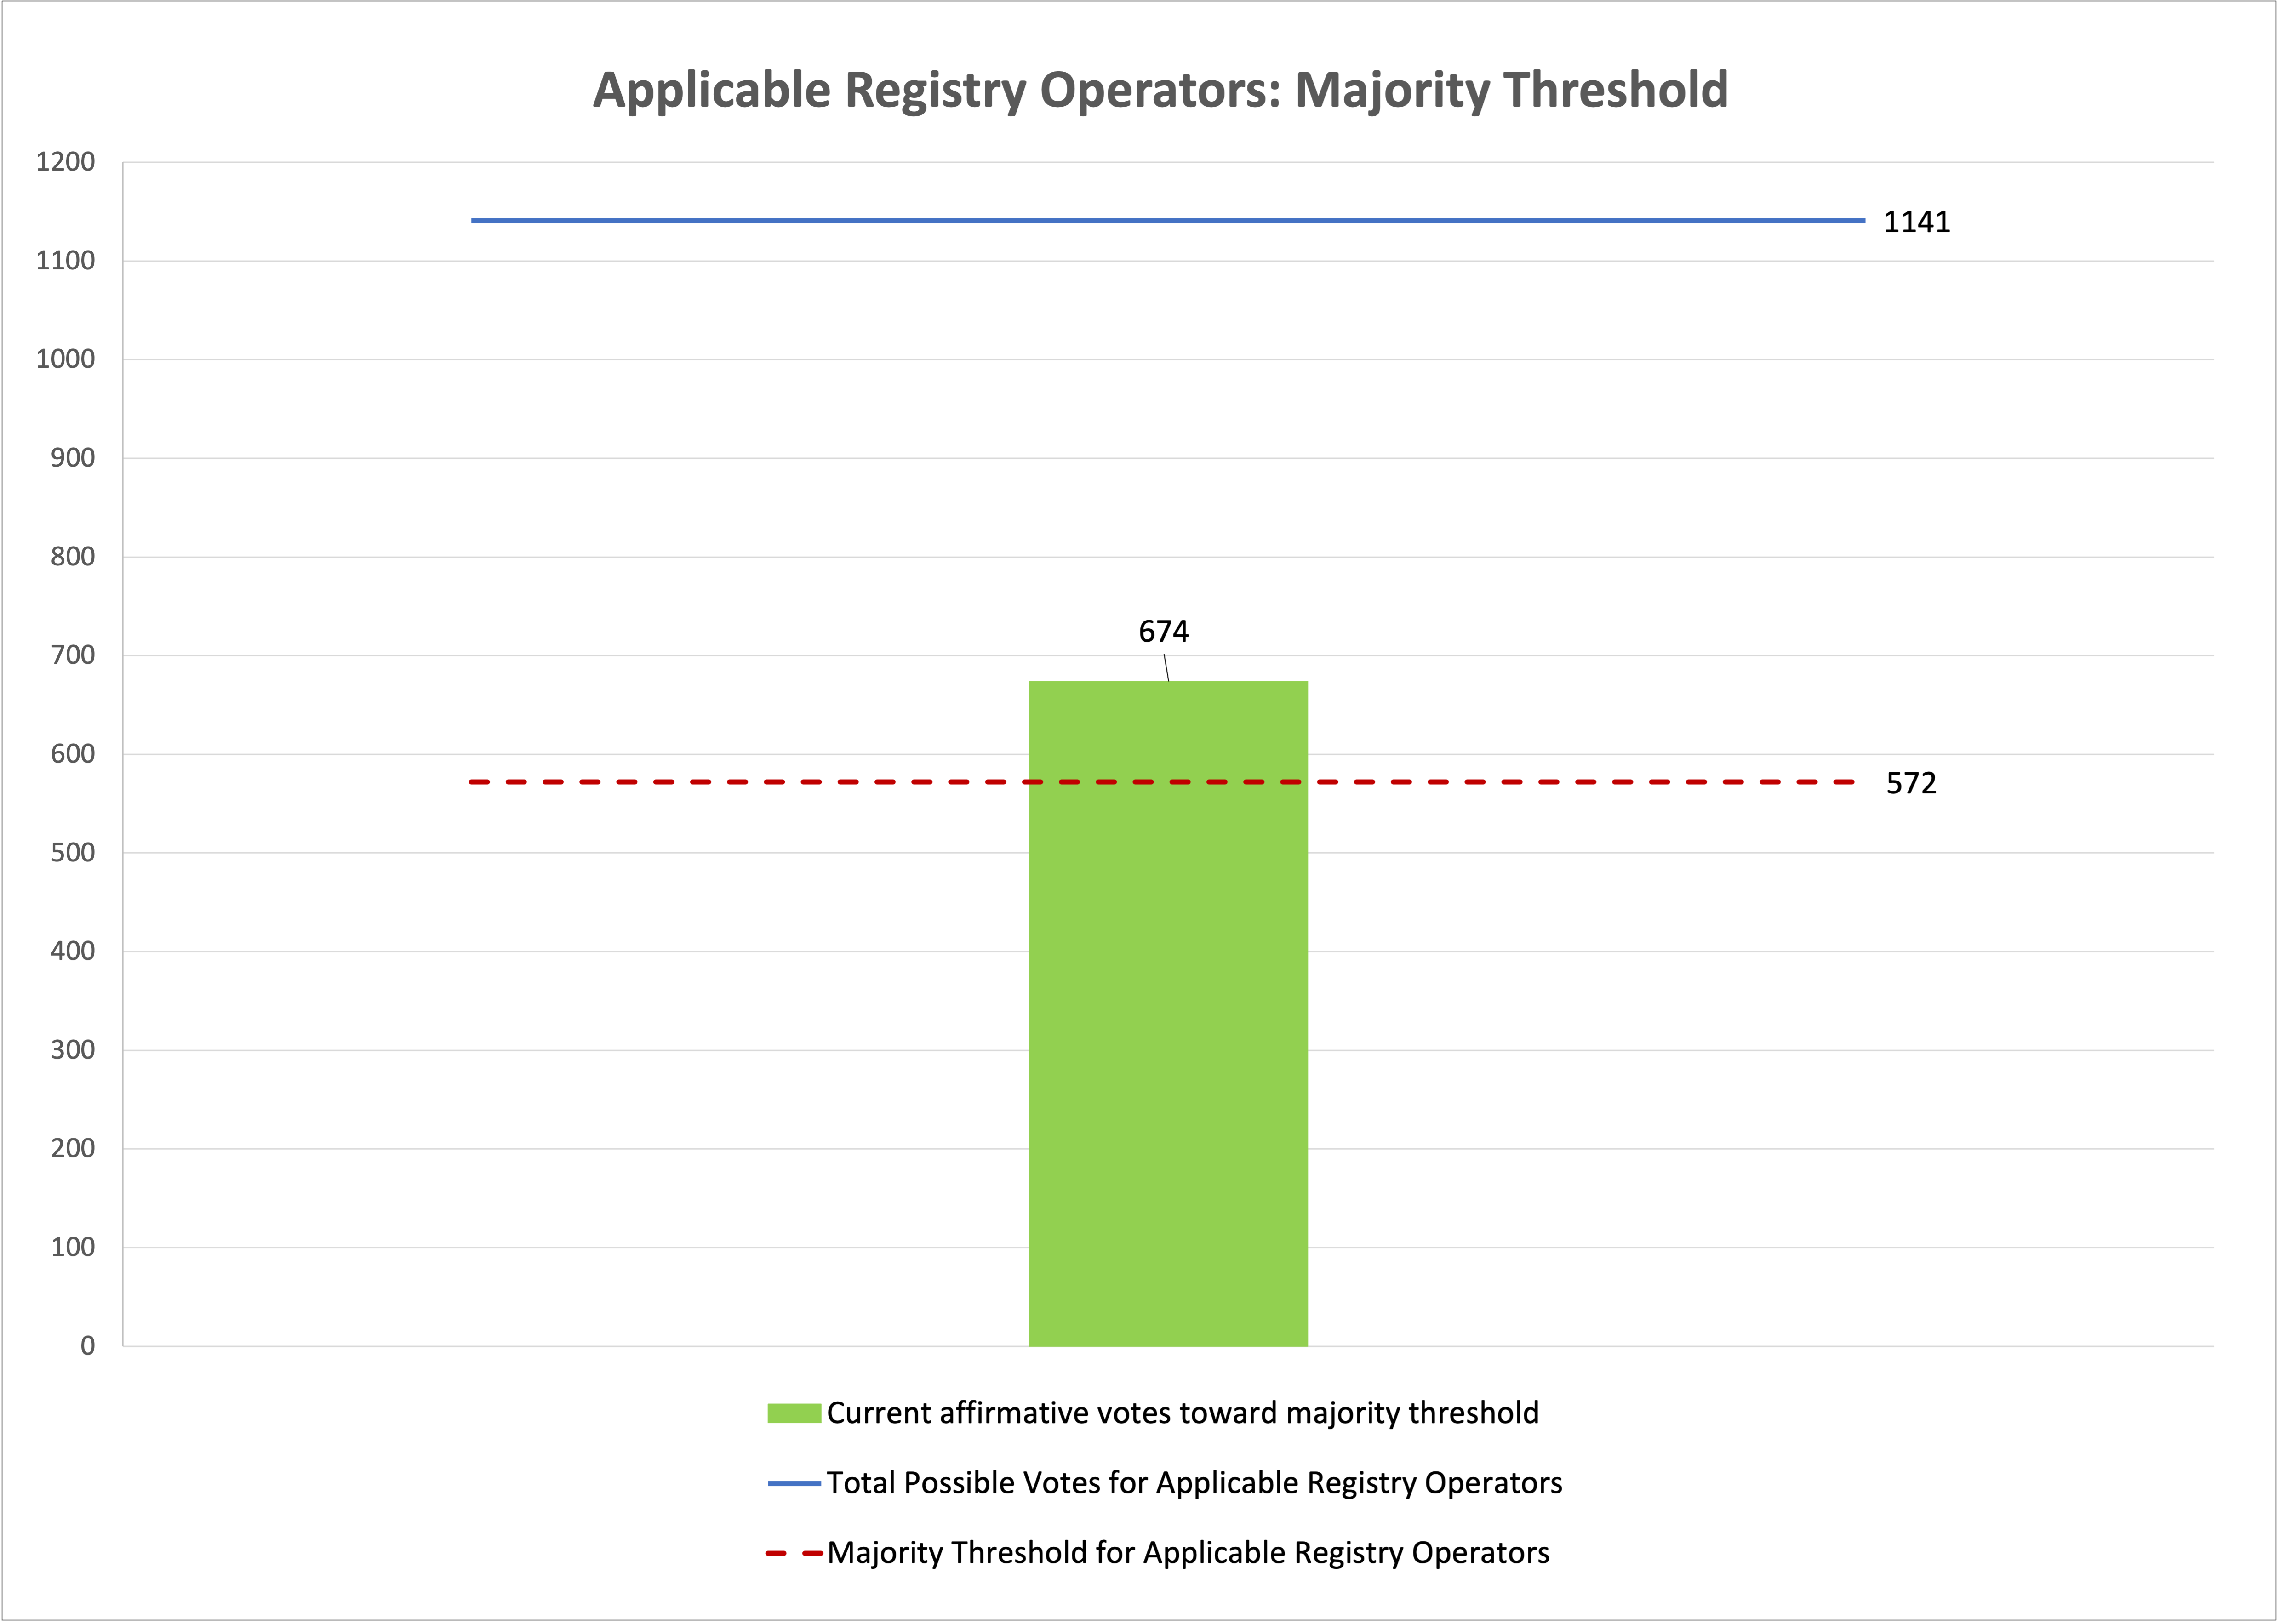 Bar chart of the progress of the vote towards meeting the majority threshold for Applicable Registry Operators. Majority approval threshold of 572, with current affirmative votes toward the majority threshold at 674.